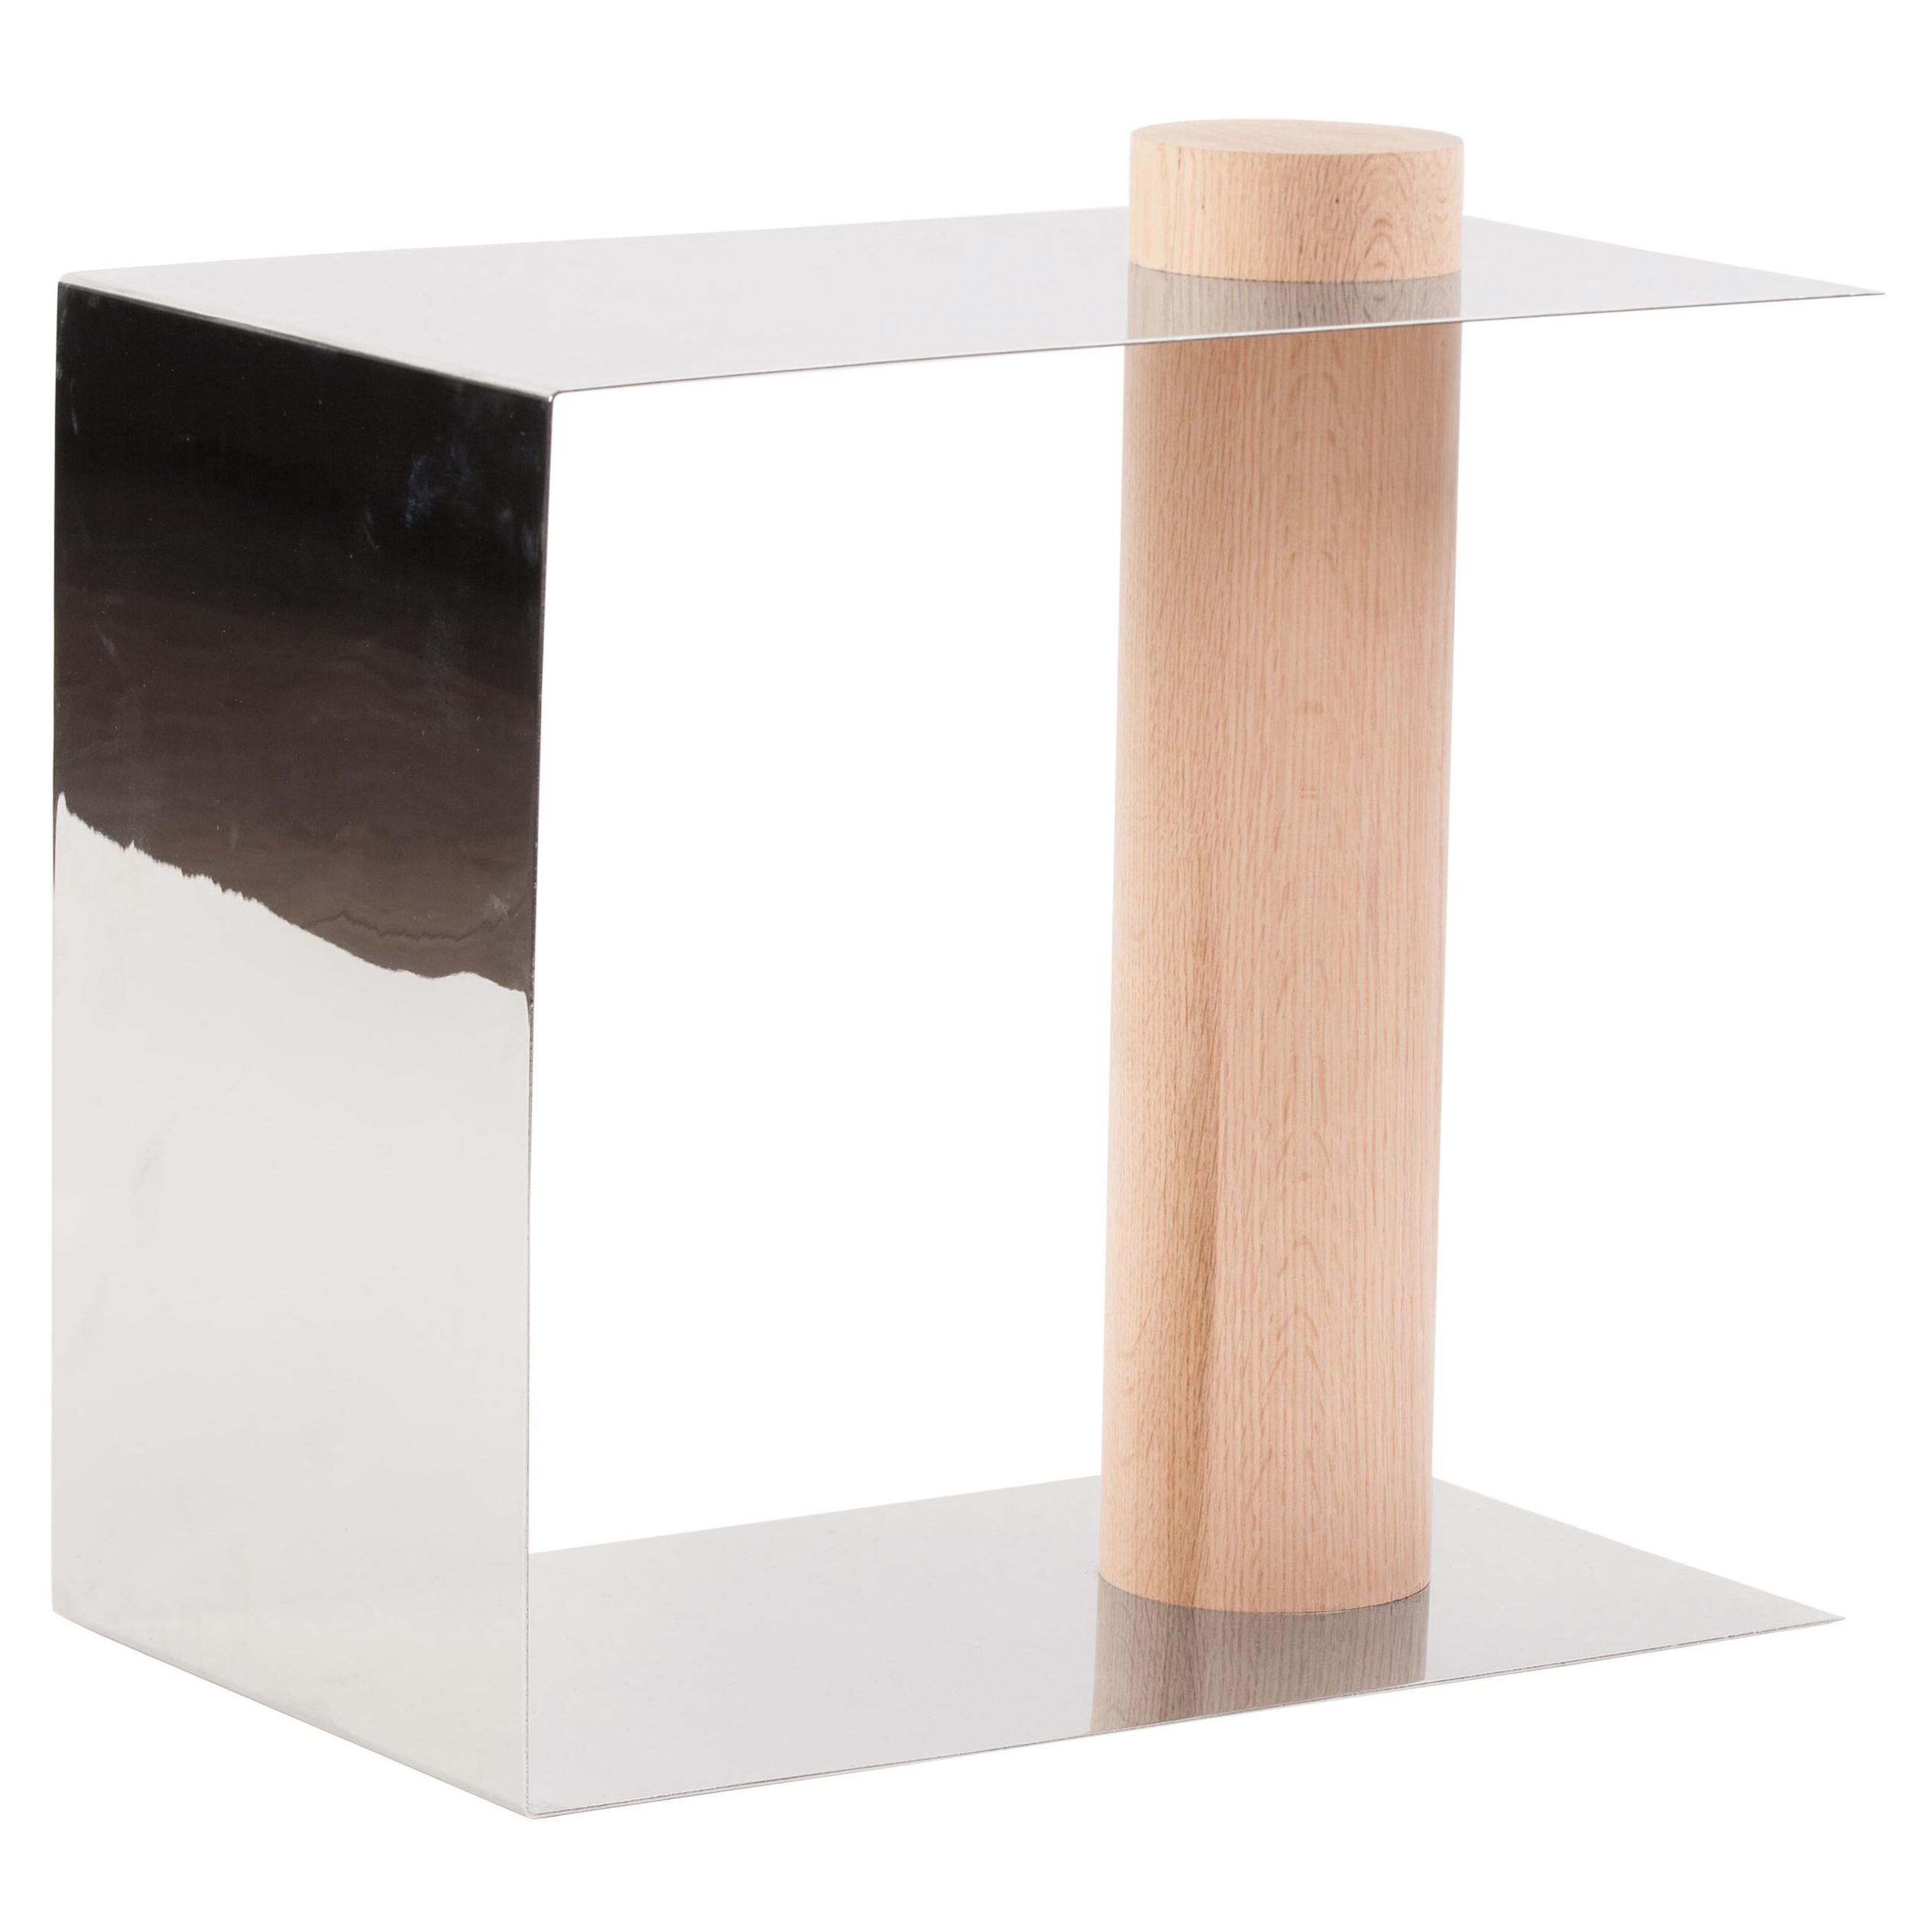 In Stock, Puru Side Table in Stainless Steel & White Oak by Estudio Persona For Sale